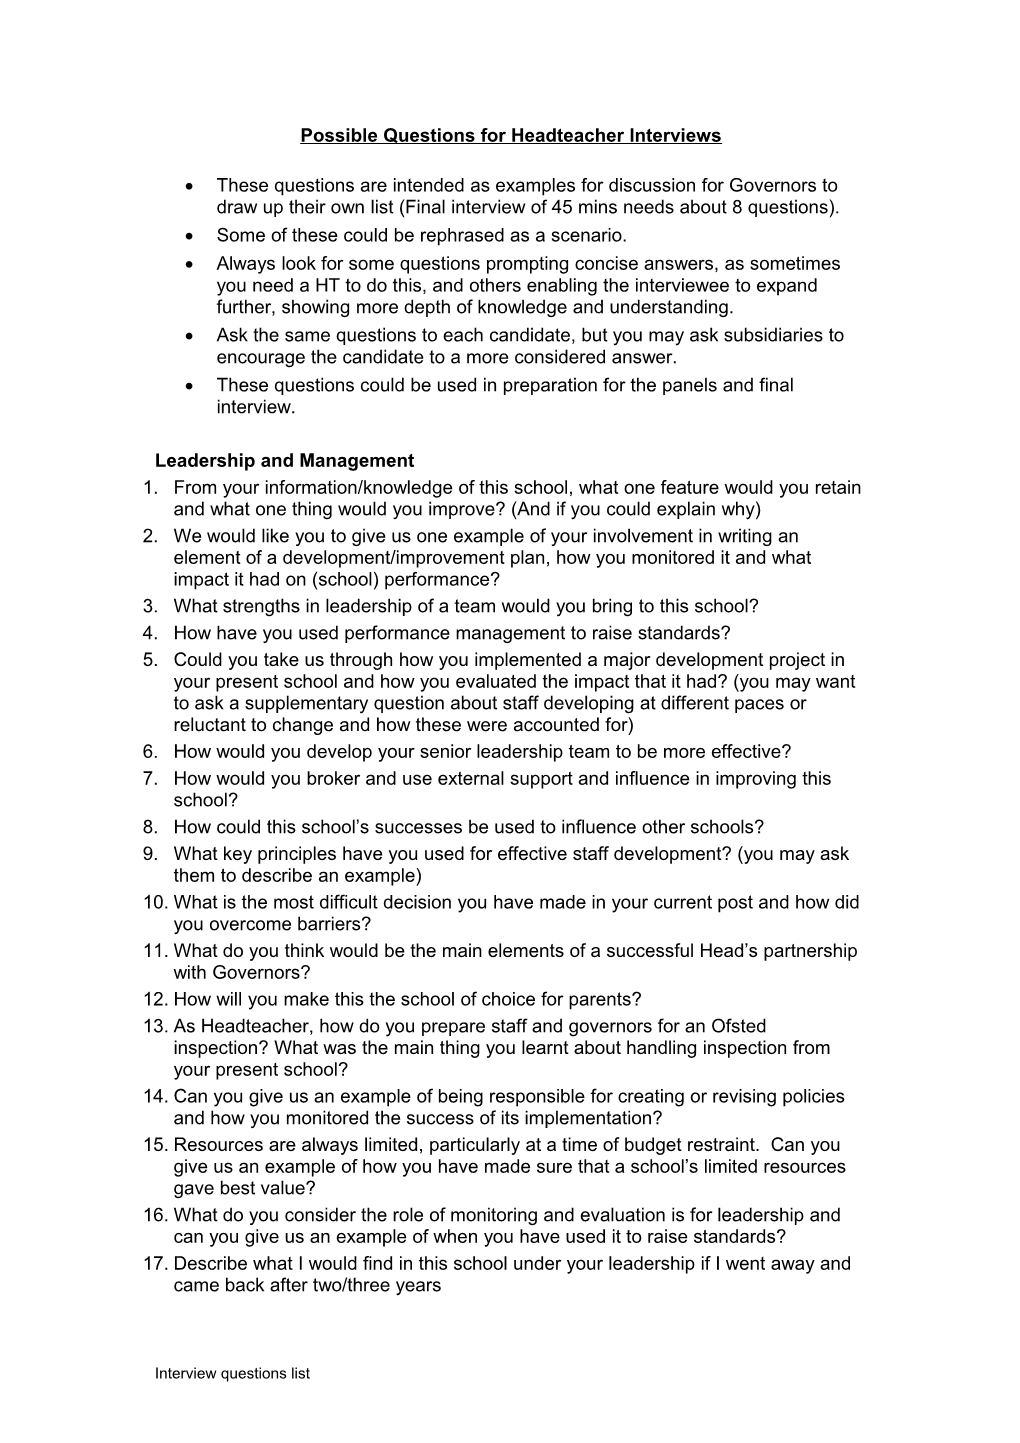 Possible Questions for Headteacher Interviews